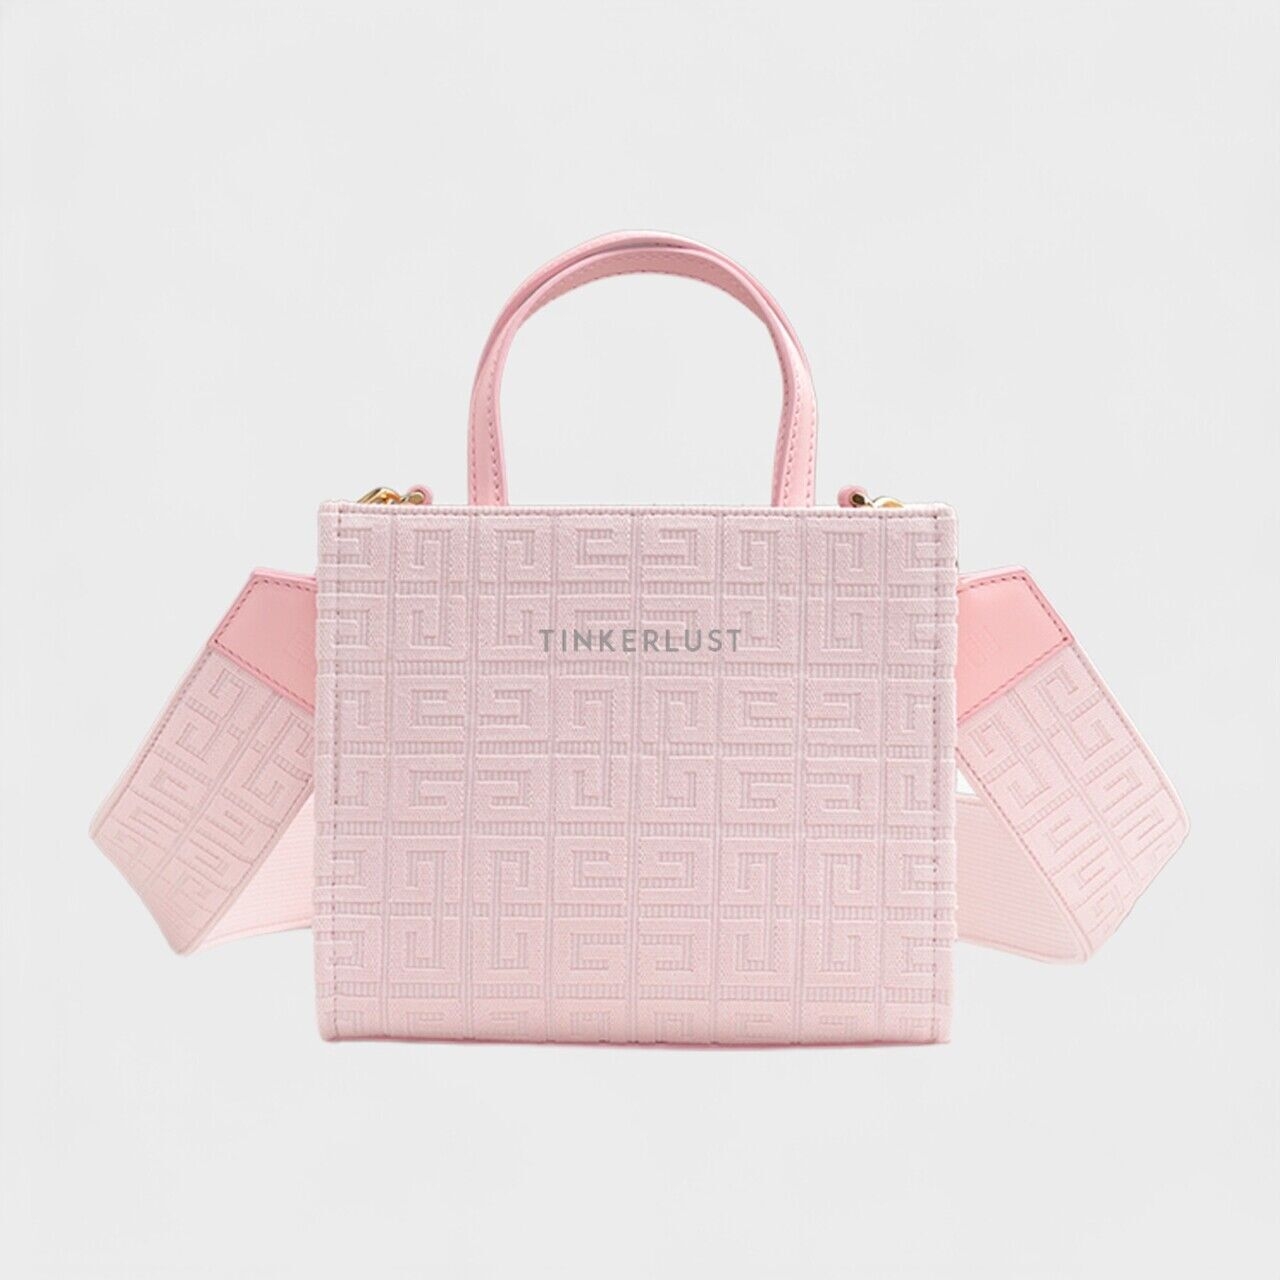 Givency Mini Embroidered G Shopper in Tender Pink Canvas with 4G Debossed Satchel Bag